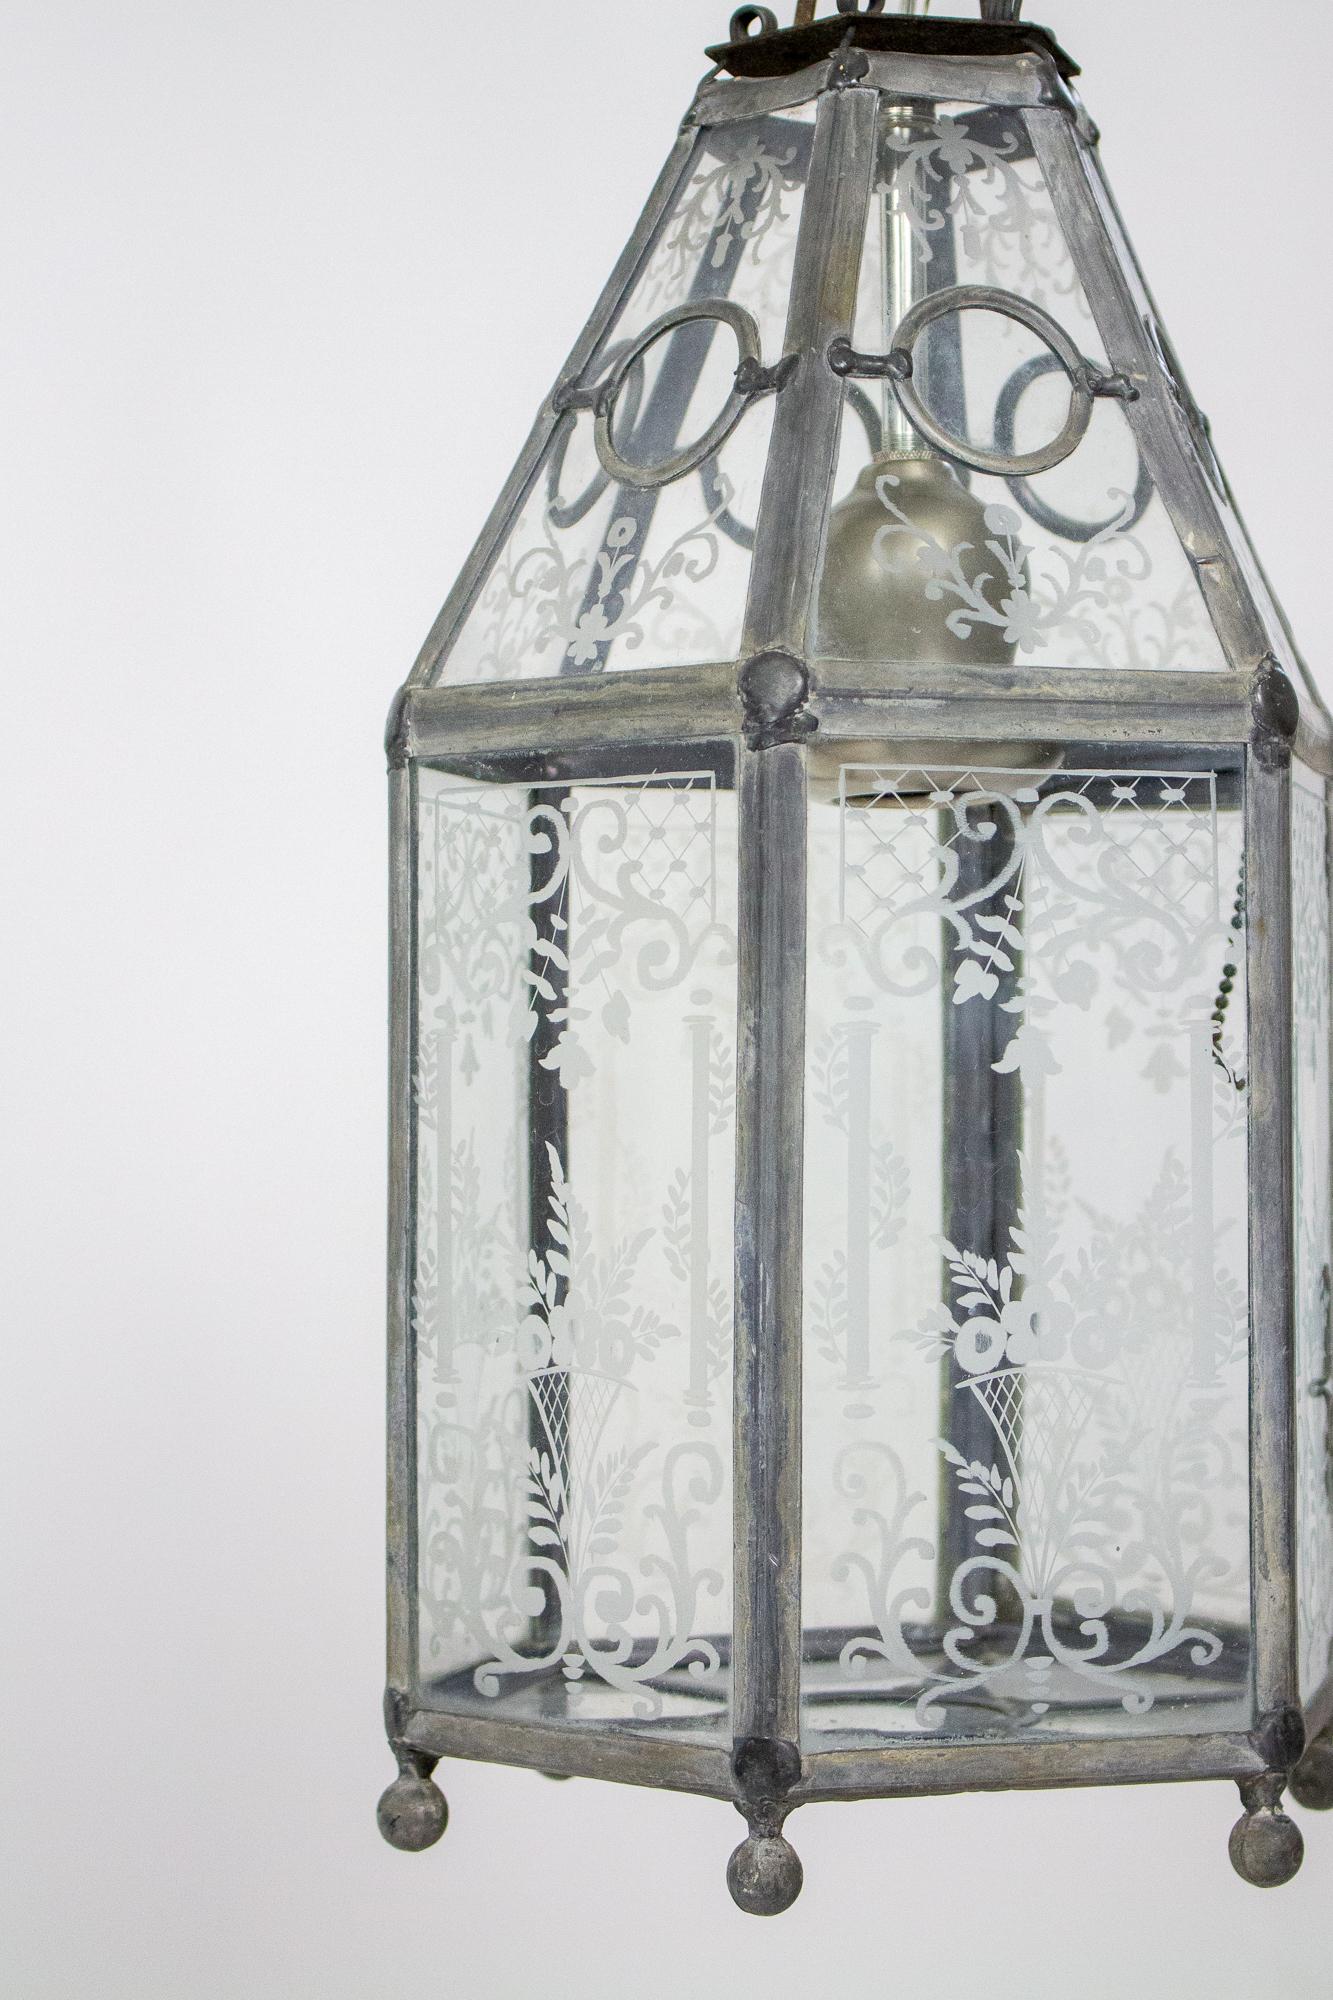 Early 20th Century E.F. Caldwell Leaded Glass Lantern For Sale 2